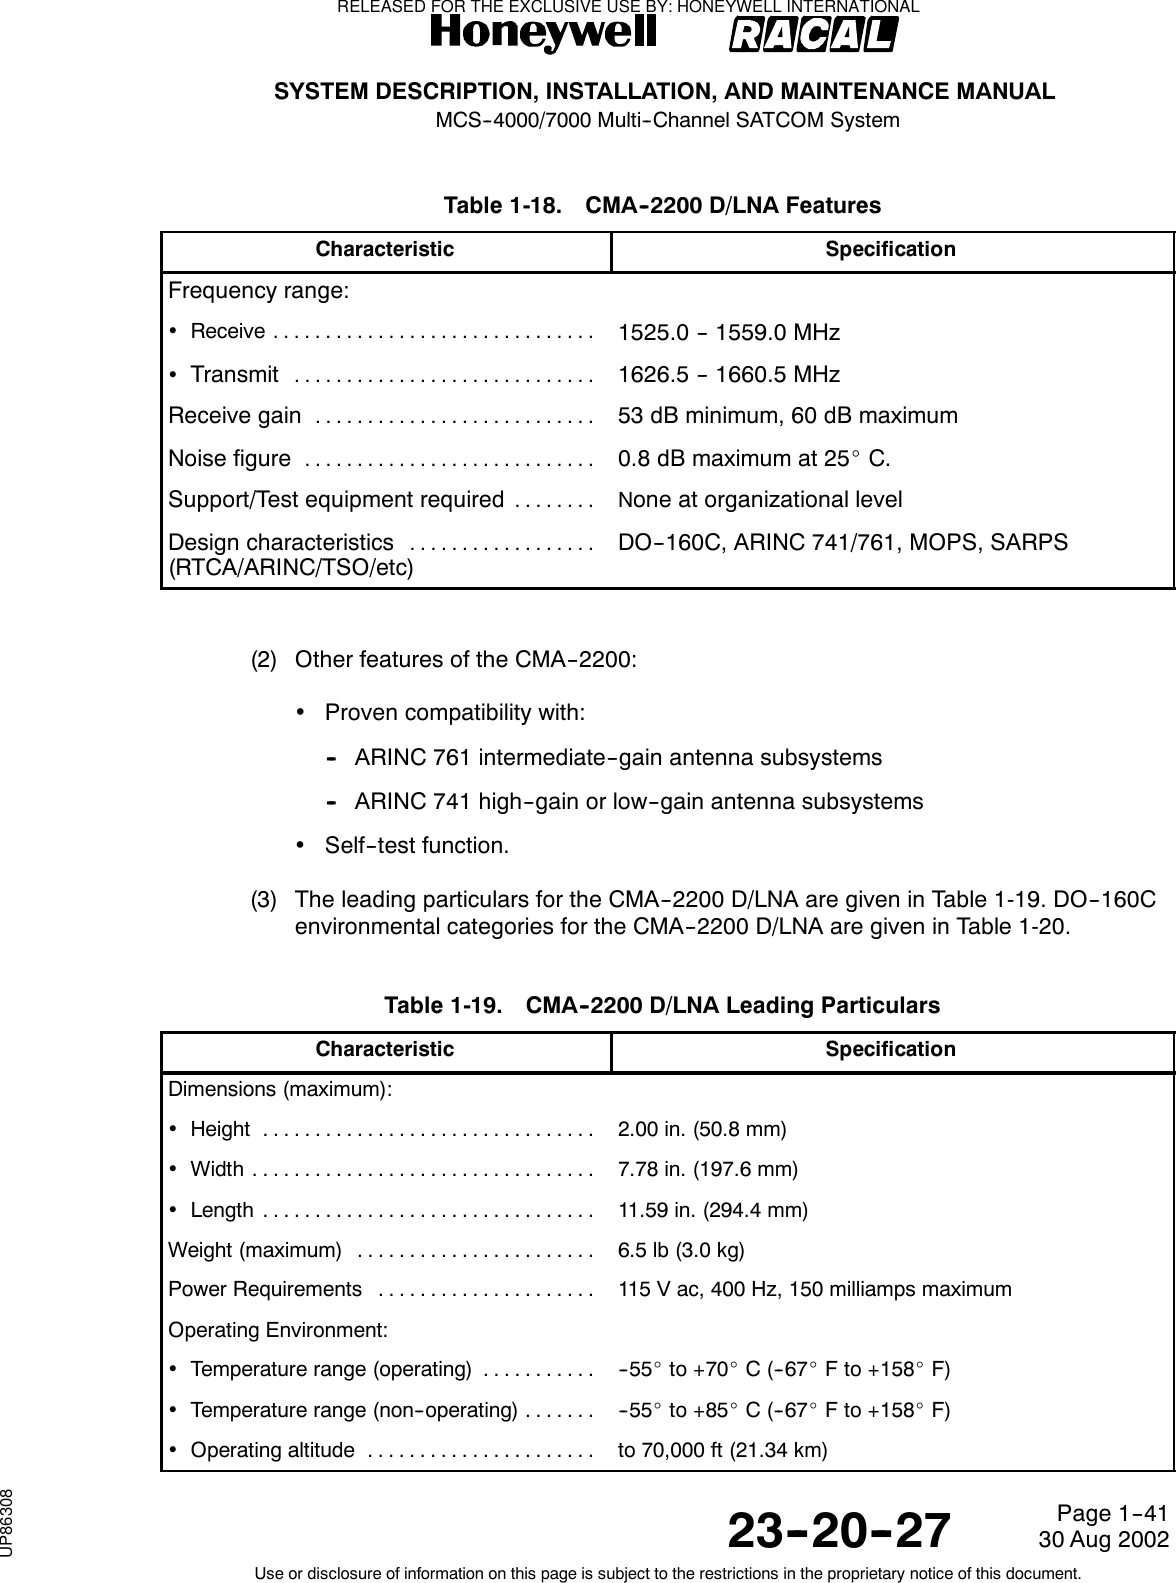 SYSTEM DESCRIPTION, INSTALLATION, AND MAINTENANCE MANUALMCS--4000/7000 Multi--Channel SATCOM System23--20--2730 Aug 2002Use or disclosure of information on this page is subject to the restrictions in the proprietary notice of this document.Page 1--41Table 1-18. CMA--2200 D/LNA FeaturesCharacteristic SpecificationFrequency range:•Receive ...............................1525.0 -- 1559.0 MHz•Transmit.............................1626.5 -- 1660.5 MHzReceive gain...........................53 dB minimum, 60 dB maximumNoise figure............................0.8 dB maximum at 25_C.Support/Test equipment required........ None at organizational levelDesign characteristics..................(RTCA/ARINC/TSO/etc)DO--160C, ARINC 741/761, MOPS, SARPS(2) Other features of the CMA--2200:•Proven compatibility with:-- ARINC 761 intermediate--gain antenna subsystems-- ARINC 741 high--gain or low--gain antenna subsystems•Self--test function.(3) The leading particulars for the CMA--2200 D/LNA are given in Table 1-19. DO--160Cenvironmental categories for the CMA--2200 D/LNA are given in Table 1-20.Table 1-19. CMA--2200 D/LNA Leading ParticularsCharacteristic SpecificationDimensions (maximum):•Height ................................ 2.00 in. (50.8 mm)•Width ................................. 7.78 in. (197.6 mm)•Length ................................ 11.59 in. (294.4 mm)Weight (maximum) ....................... 6.5lb(3.0kg)Power Requirements ..................... 115 V ac, 400 Hz, 150 milliamps maximumOperating Environment:•Temperature range (operating) ........... -- 5 5 _to +70_C(--67_F to +158_F)•Temperature range (non--operating) ....... -- 5 5 _to +85_C(--67_F to +158_F)•Operatingaltitude ...................... to 70,000 ft (21.34 km)RELEASED FOR THE EXCLUSIVE USE BY: HONEYWELL INTERNATIONALUP86308